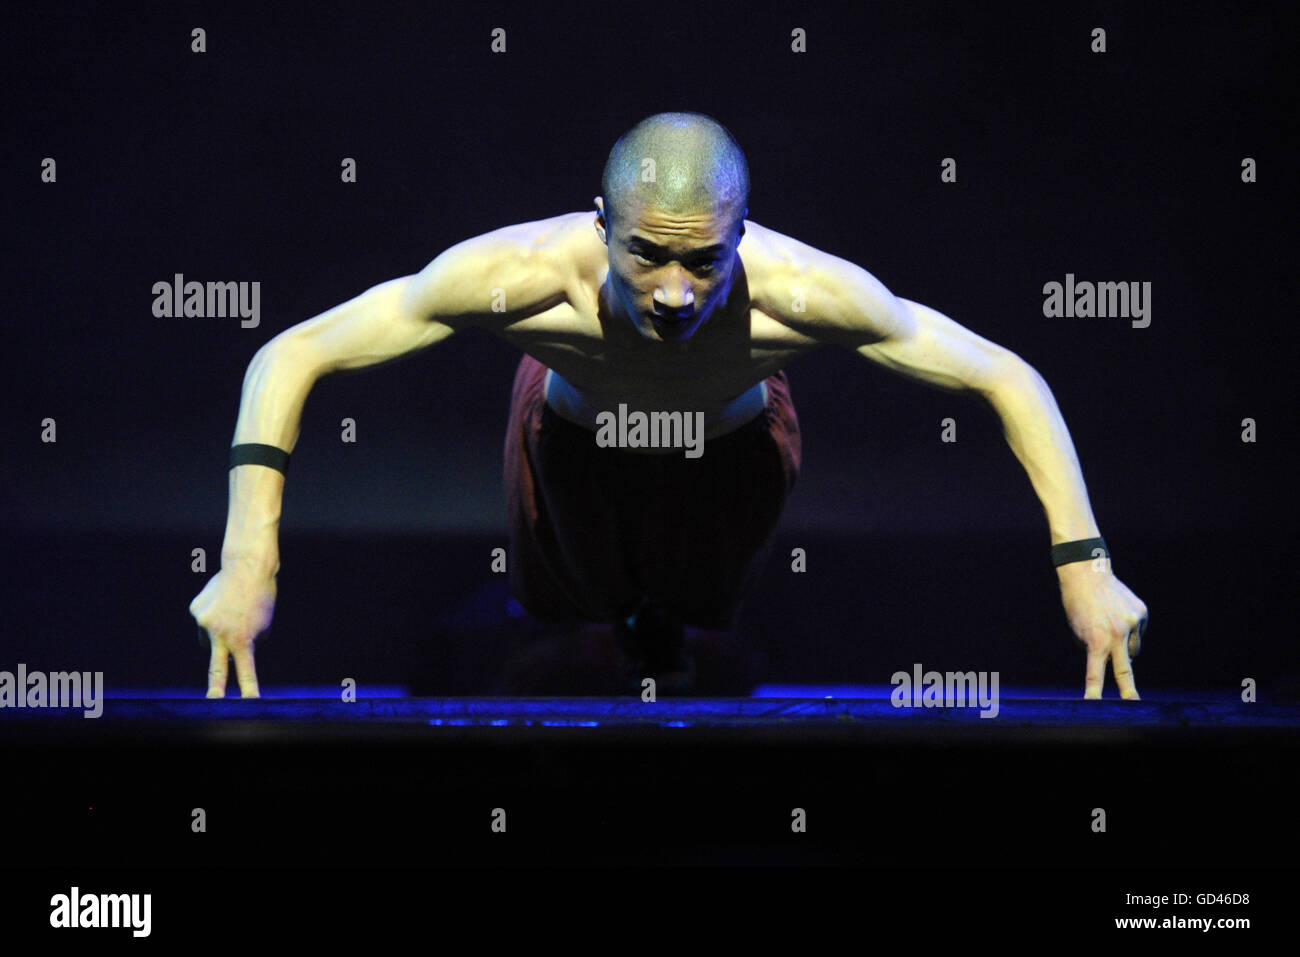 Singapore. 13th July, 2016. A Shaolin monk performs in the media preview of the show Shaolin at Singapore's Marina Bay Sands Theatre, July 13, 2016. The show Shaolin, which features traditional Shaolin Kung Fu, will be presented by monks from China's Shaolin Temple from July 13 to 31 here in Singapore. Credit:  Then Chih Wey/Xinhua/Alamy Live News Stock Photo